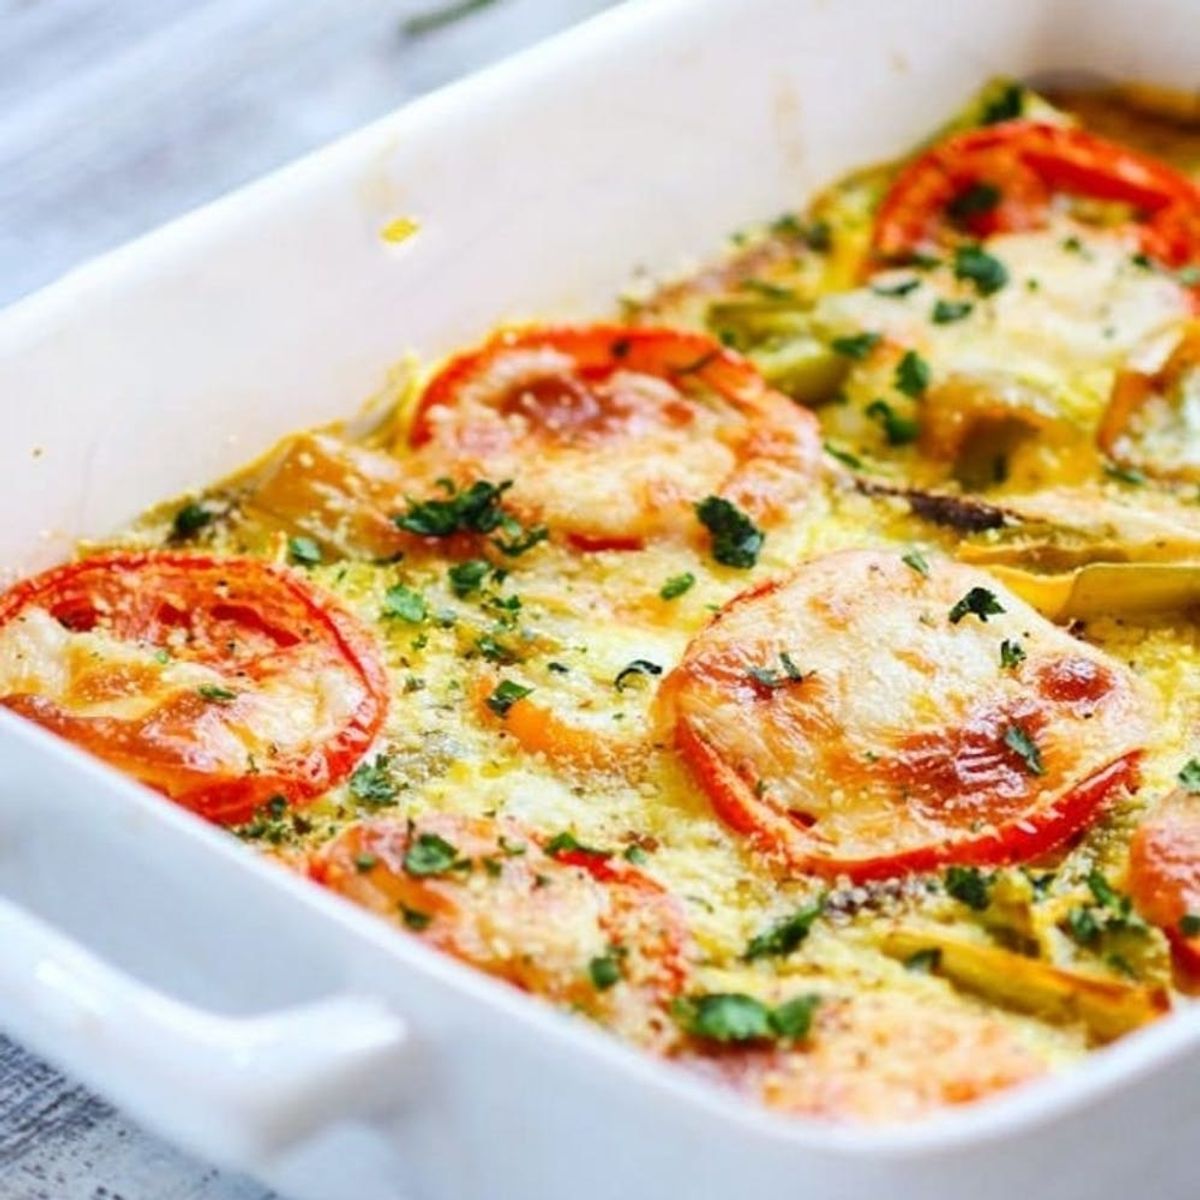 18 Summer Casserole Recipes to Use Up All Those Leftover Veggies